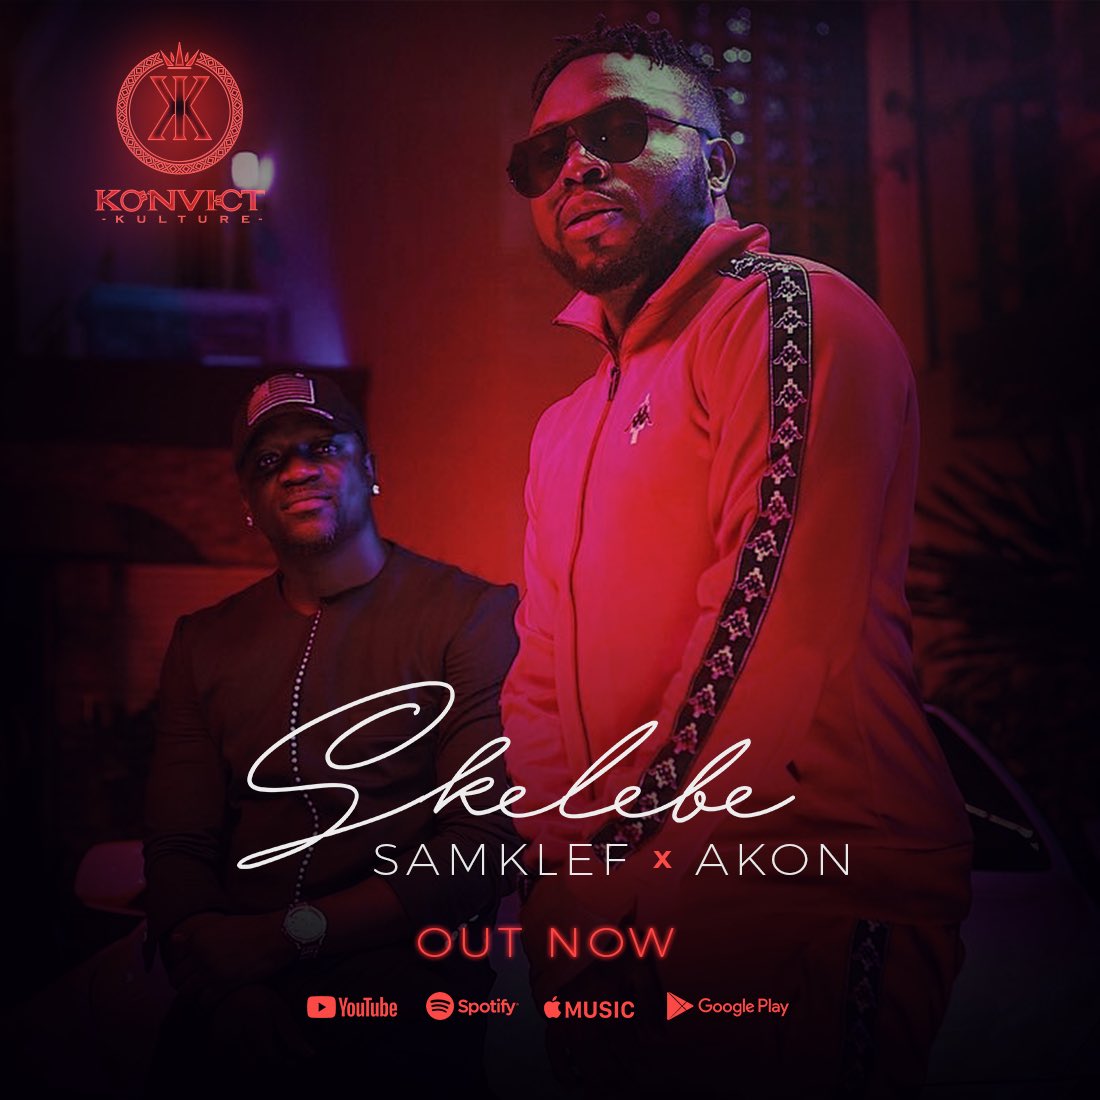 #newmusic from me and my brother @SAMKLEF #skelebe download and check out the video here????????https://t.co/5QxHqEYNjY https://t.co/D25Kql1OMZ